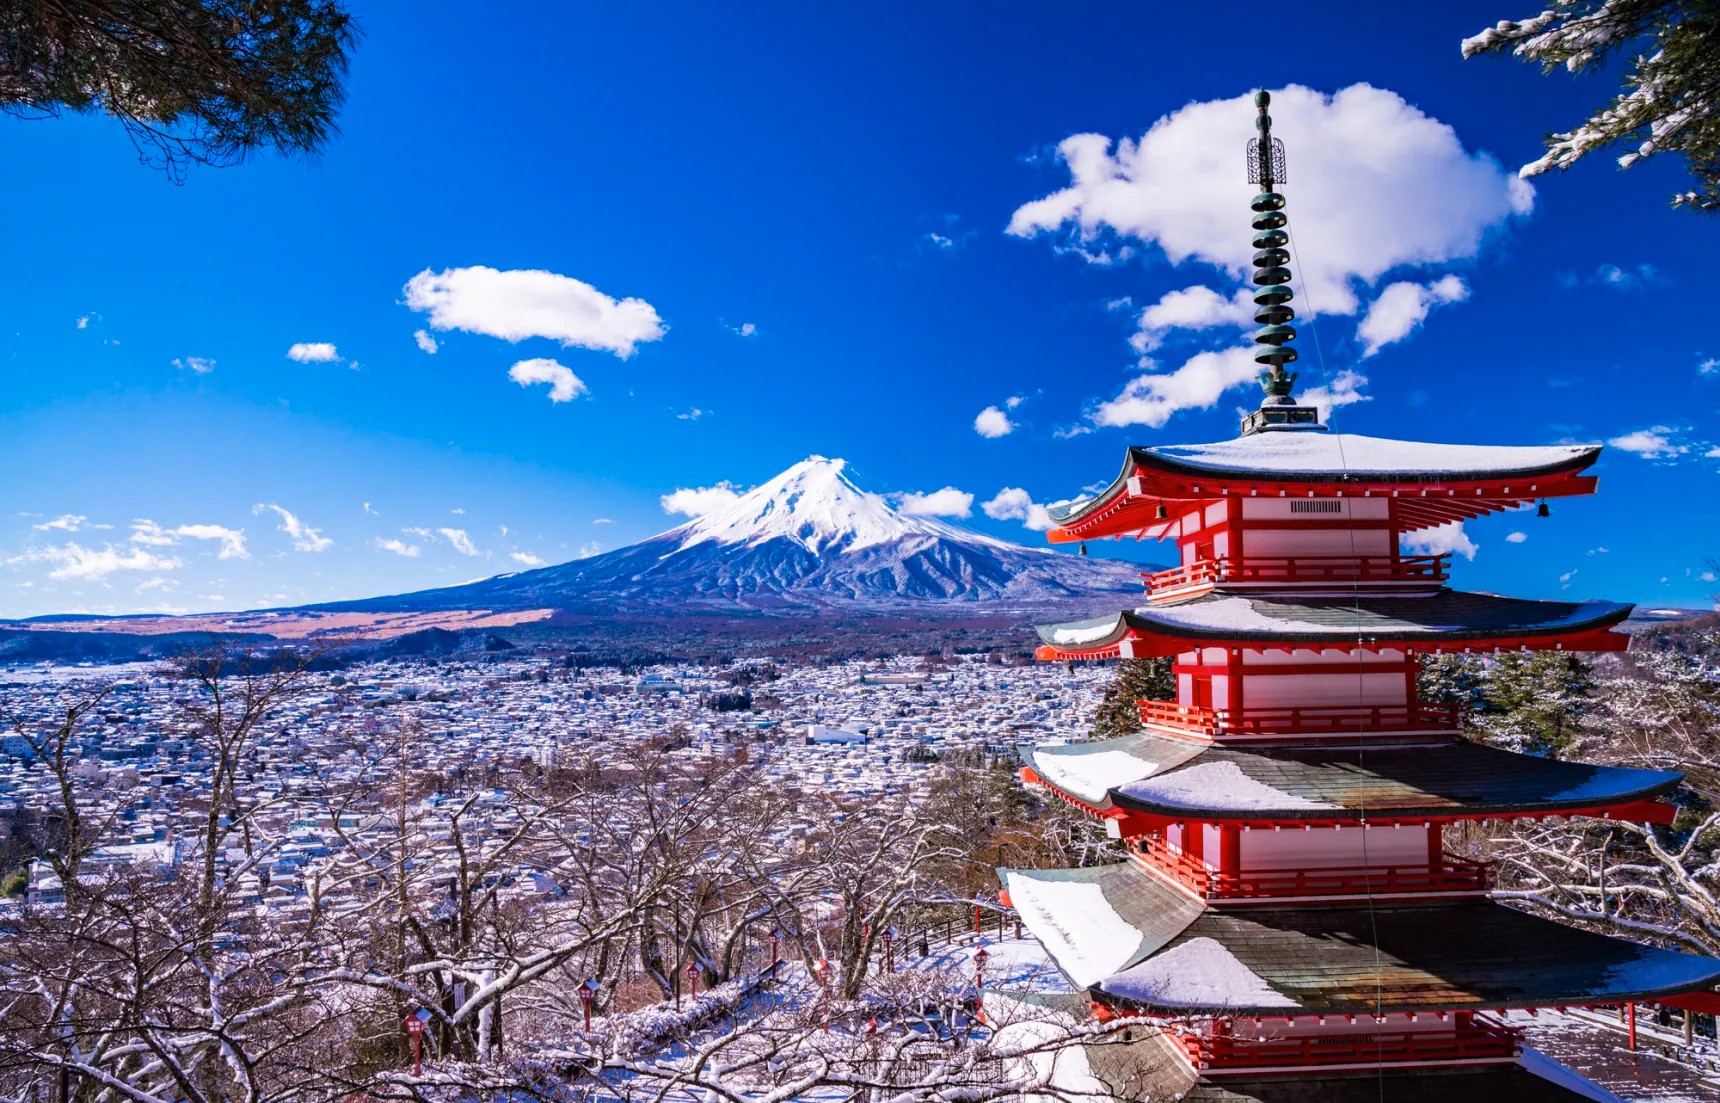 Can you visit Japan in winter?